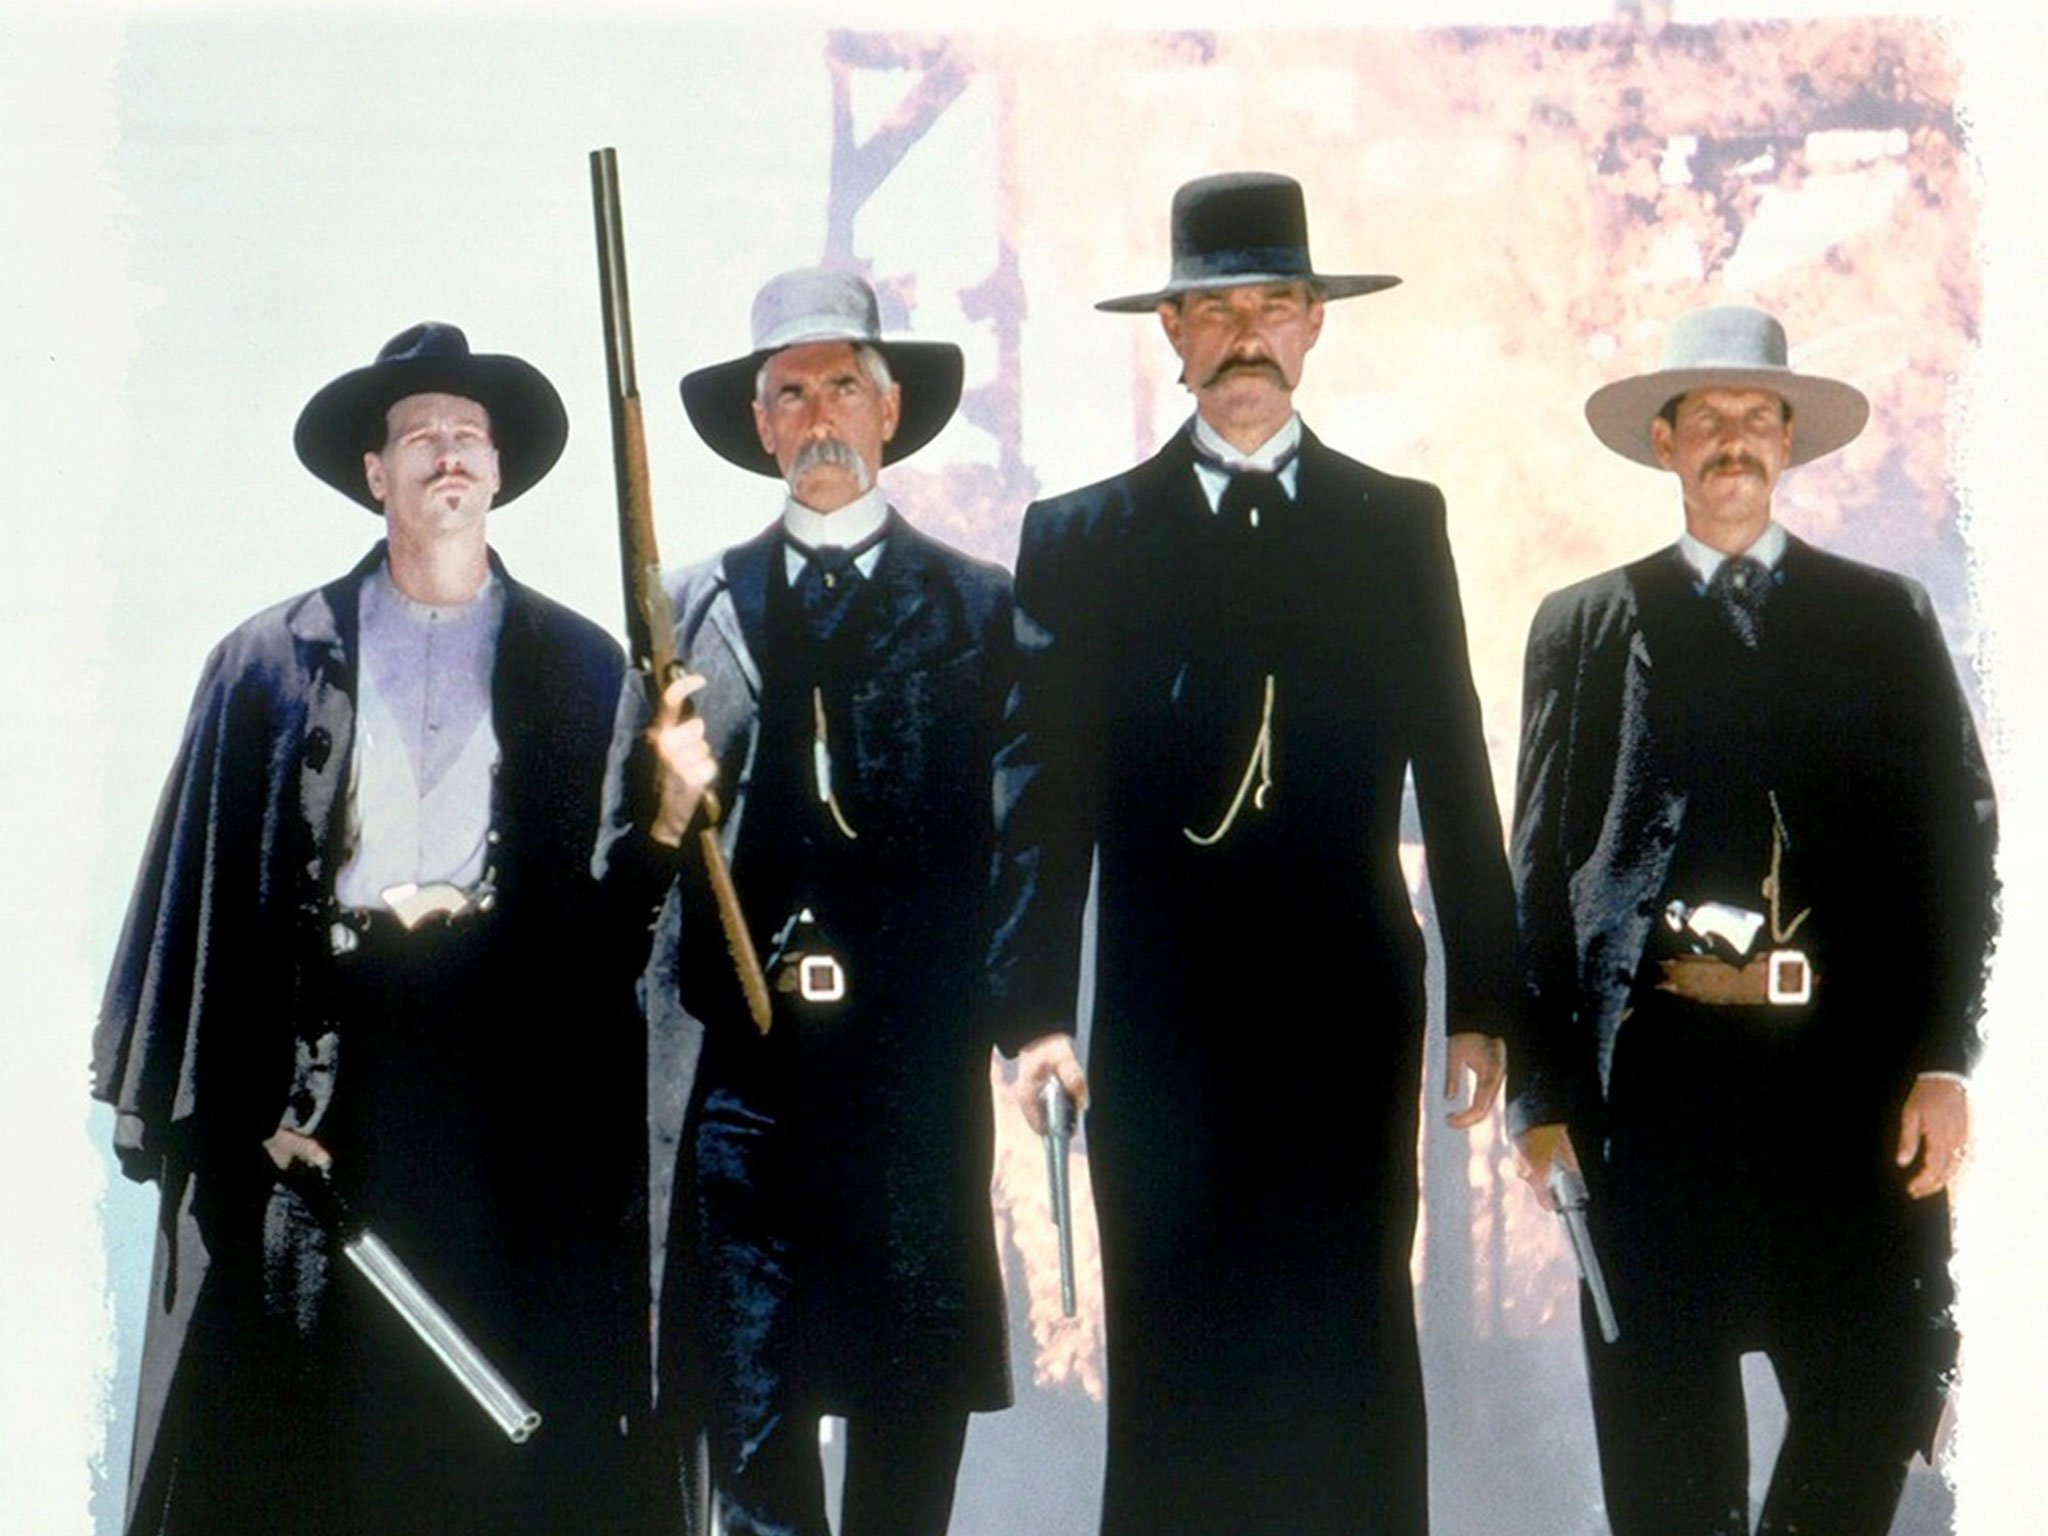 Review 10: Tombstone